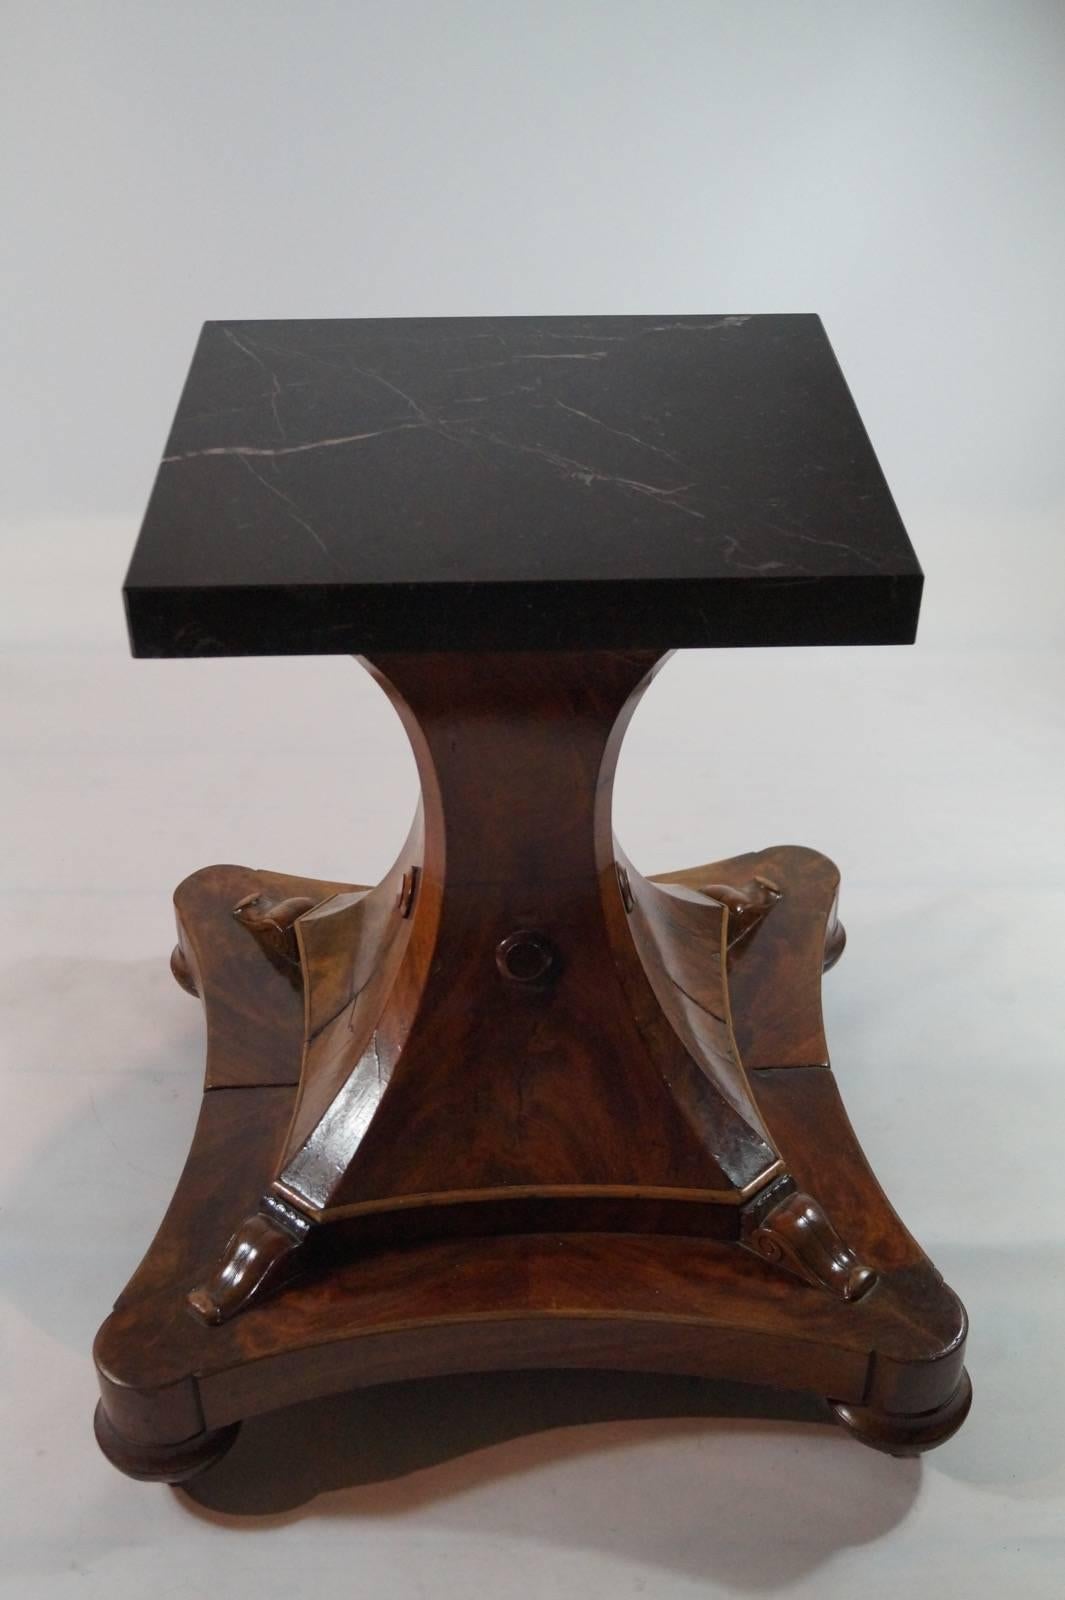 Base is from a wooden Art Deco table with black marble top.
Impressive decorative piece.
Measures:
Height 77cm.
Base 70cm x 70m.
Marble top 50cmx 50cm.